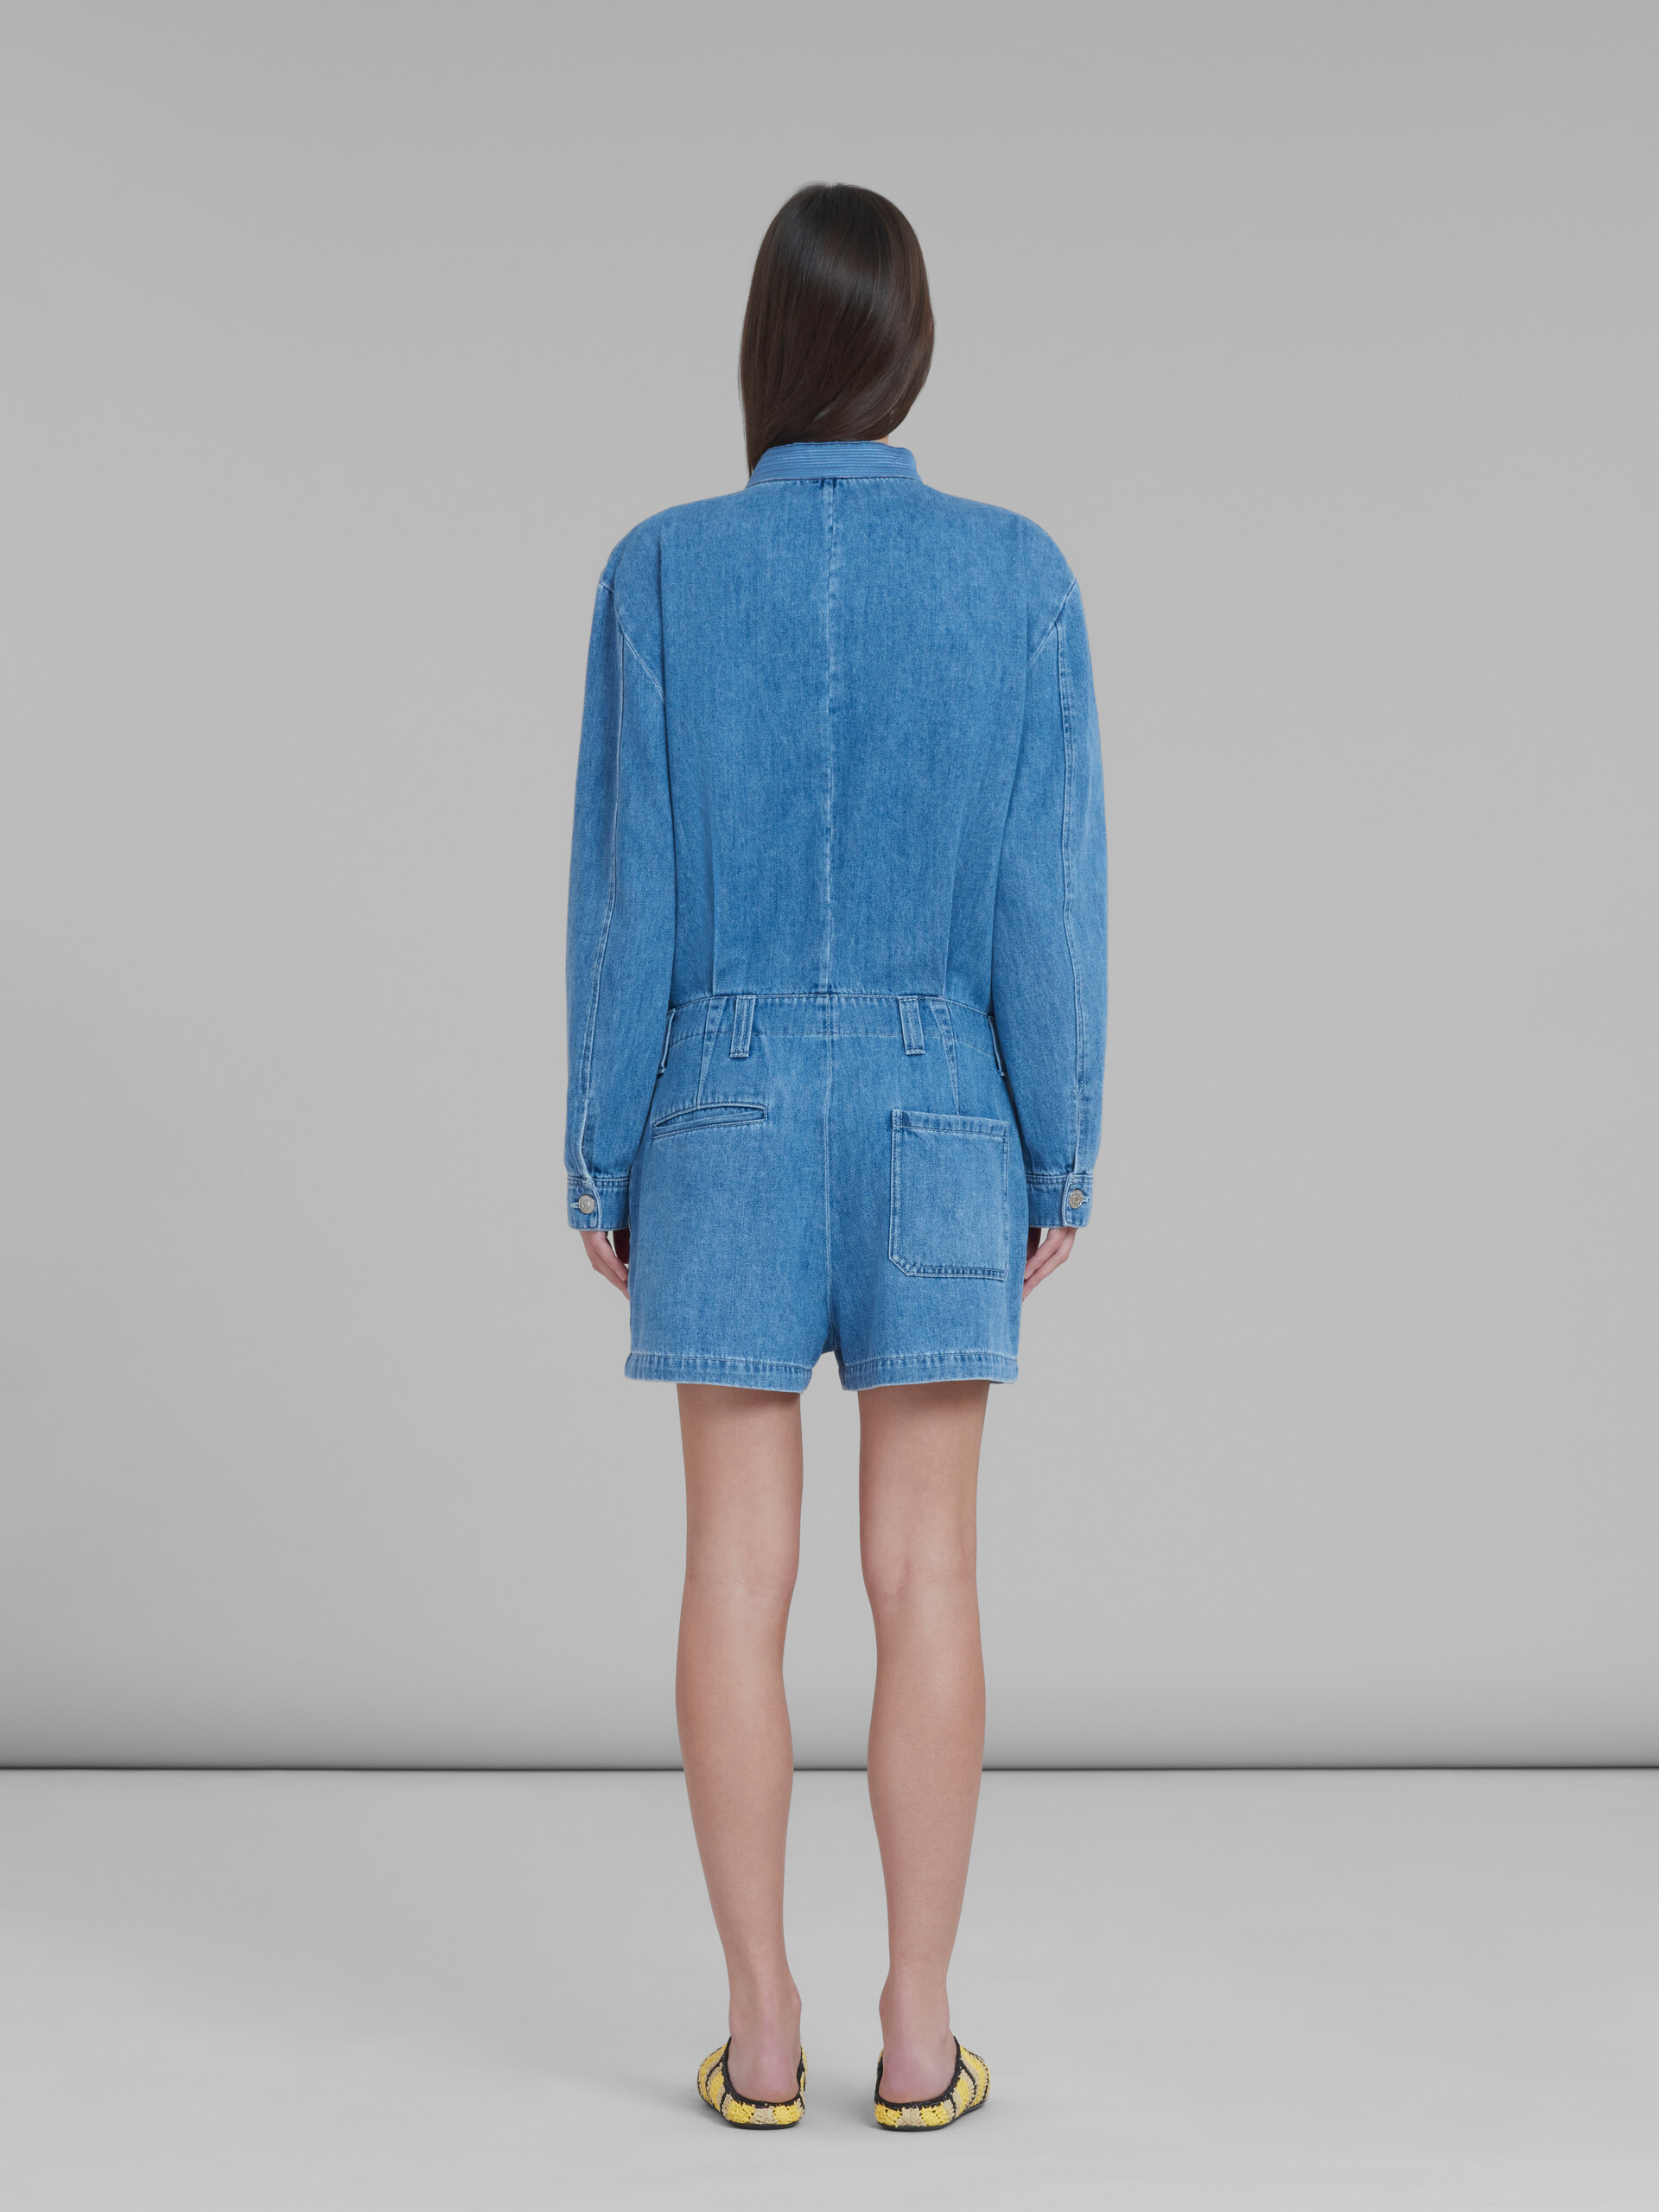 Marni x No Vacancy Inn - Blue chambray jumpsuit with embroidery - Overalls - Image 3